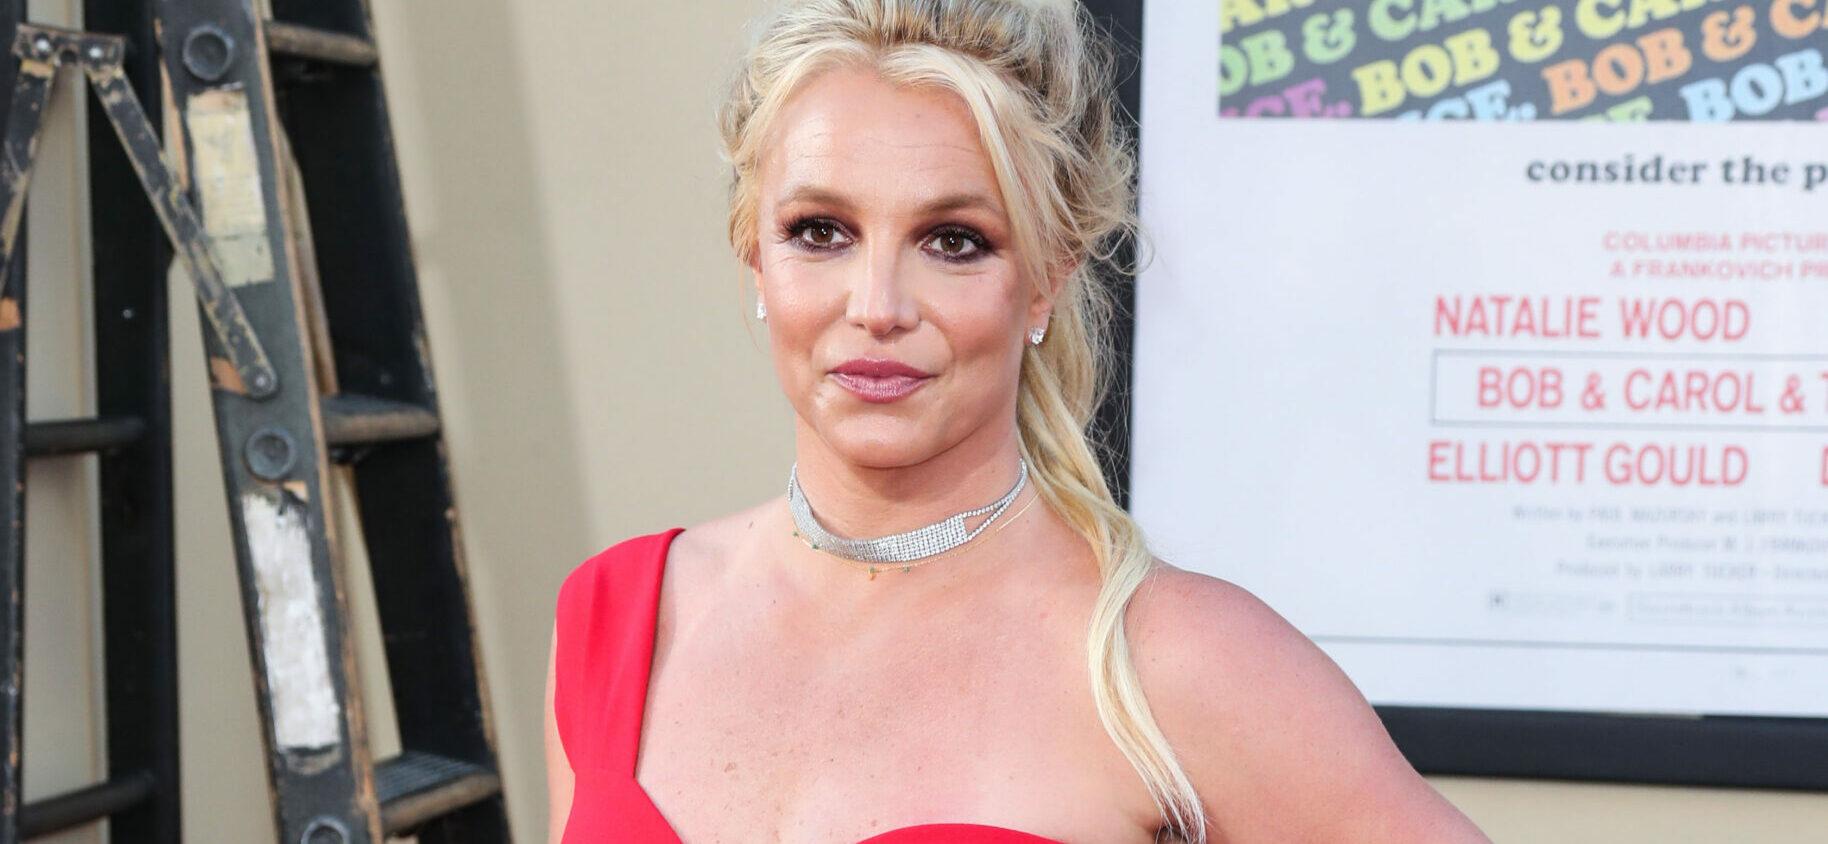 Britney Spears' Doctors Agreed Her Father Should Be Removed From Conservatorship